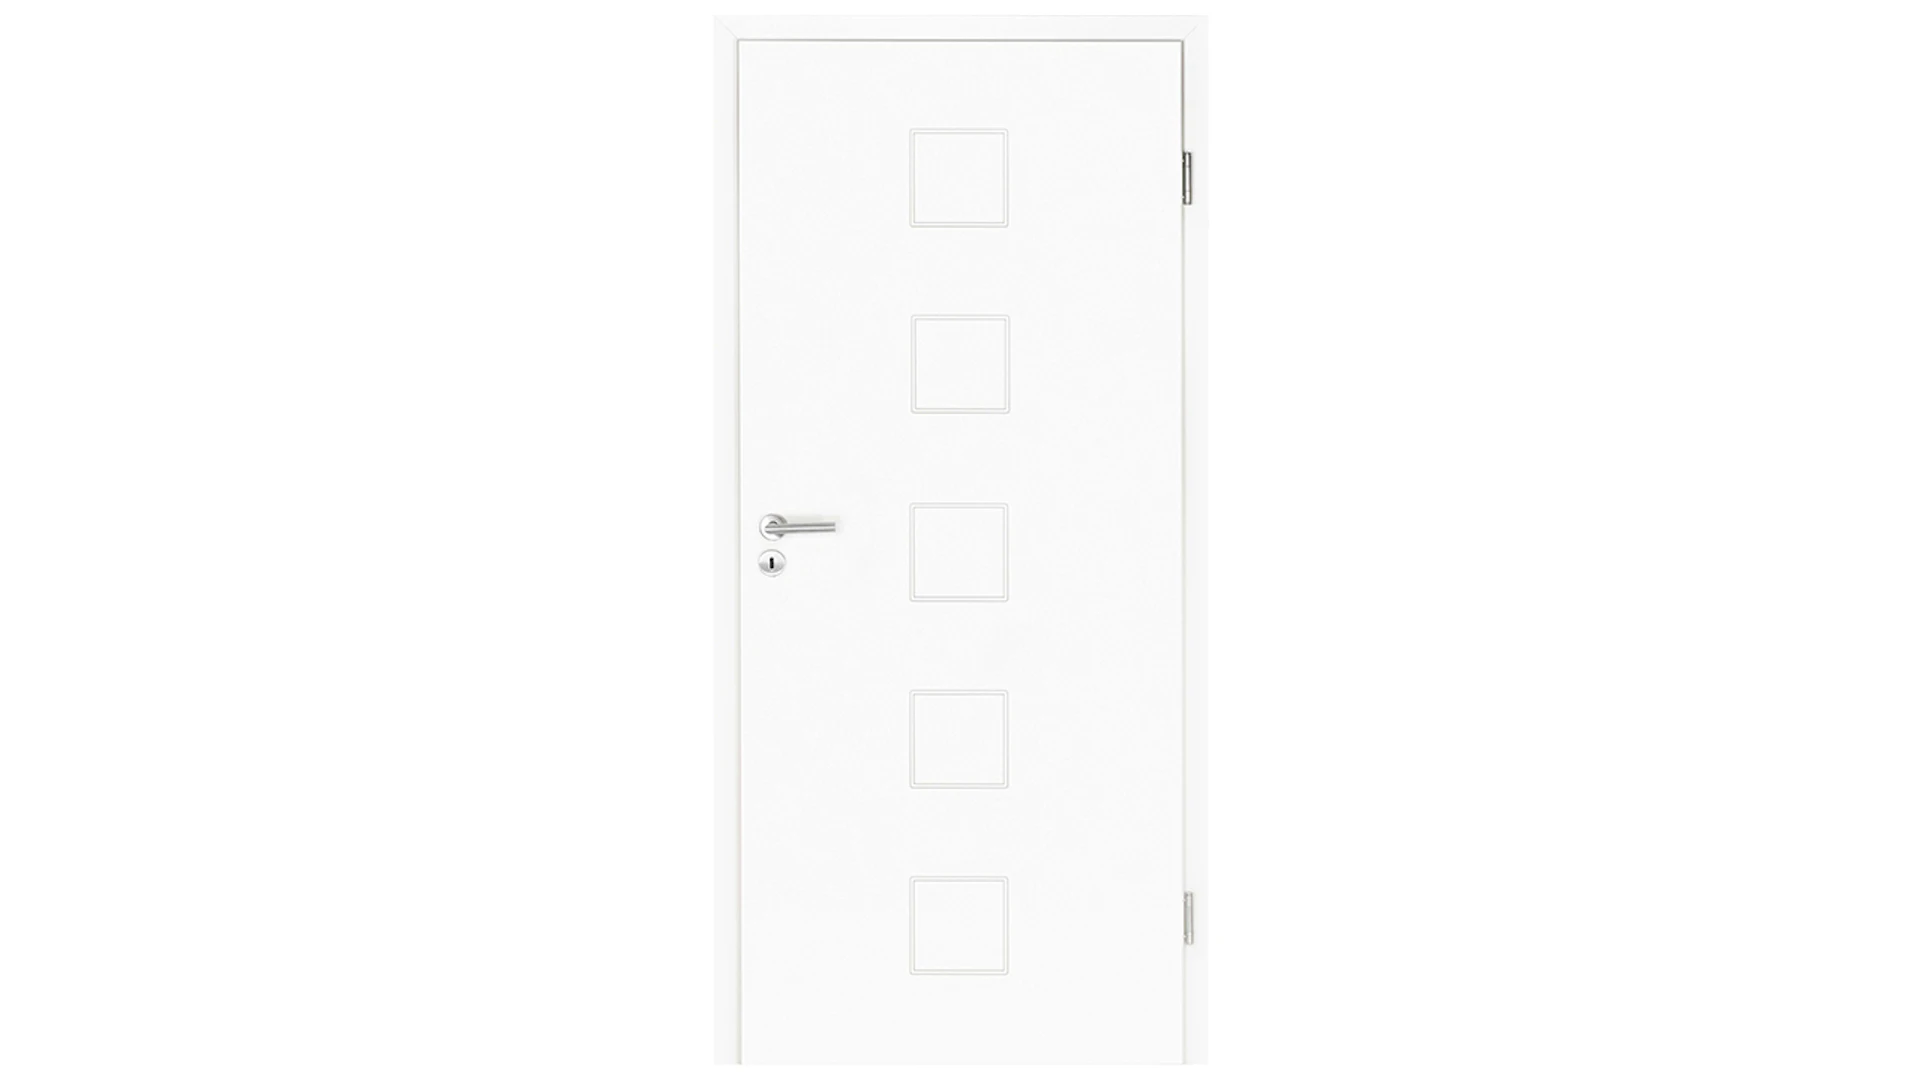 planeo interior door lacquer 2.0 - Keno 9010 white lacquer 2110 x 985 mm DIN R - round RSP hinge 3-t